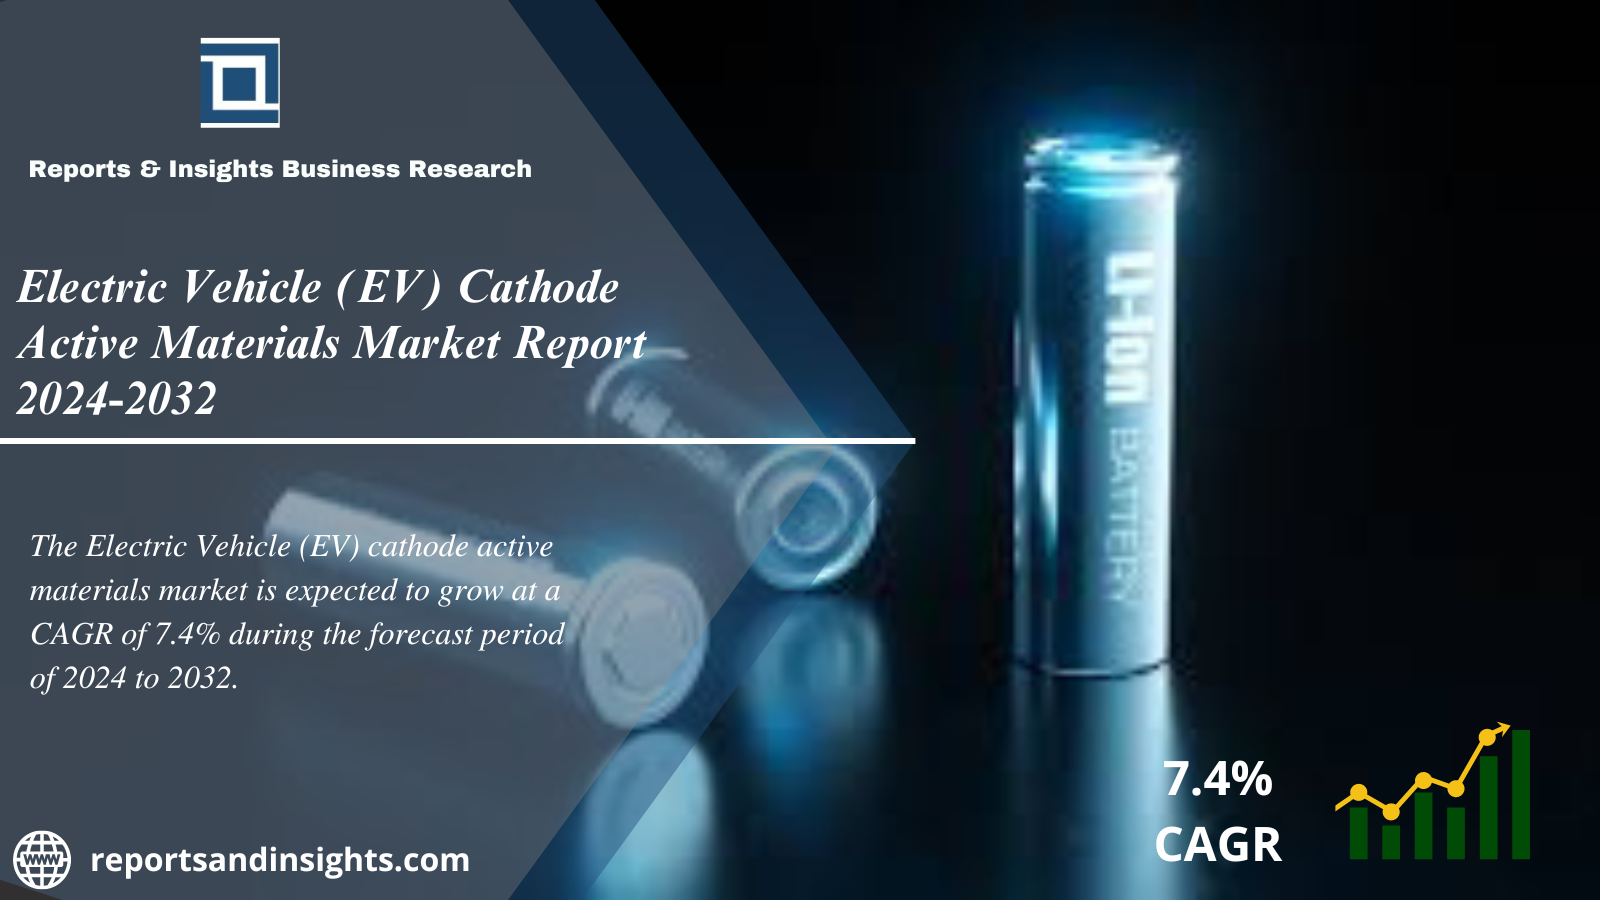 Electric Vehicle (EV) Cathode Active Materials Market Share, Size, Industry Share, Trends, Top Key Players Analysis and Research